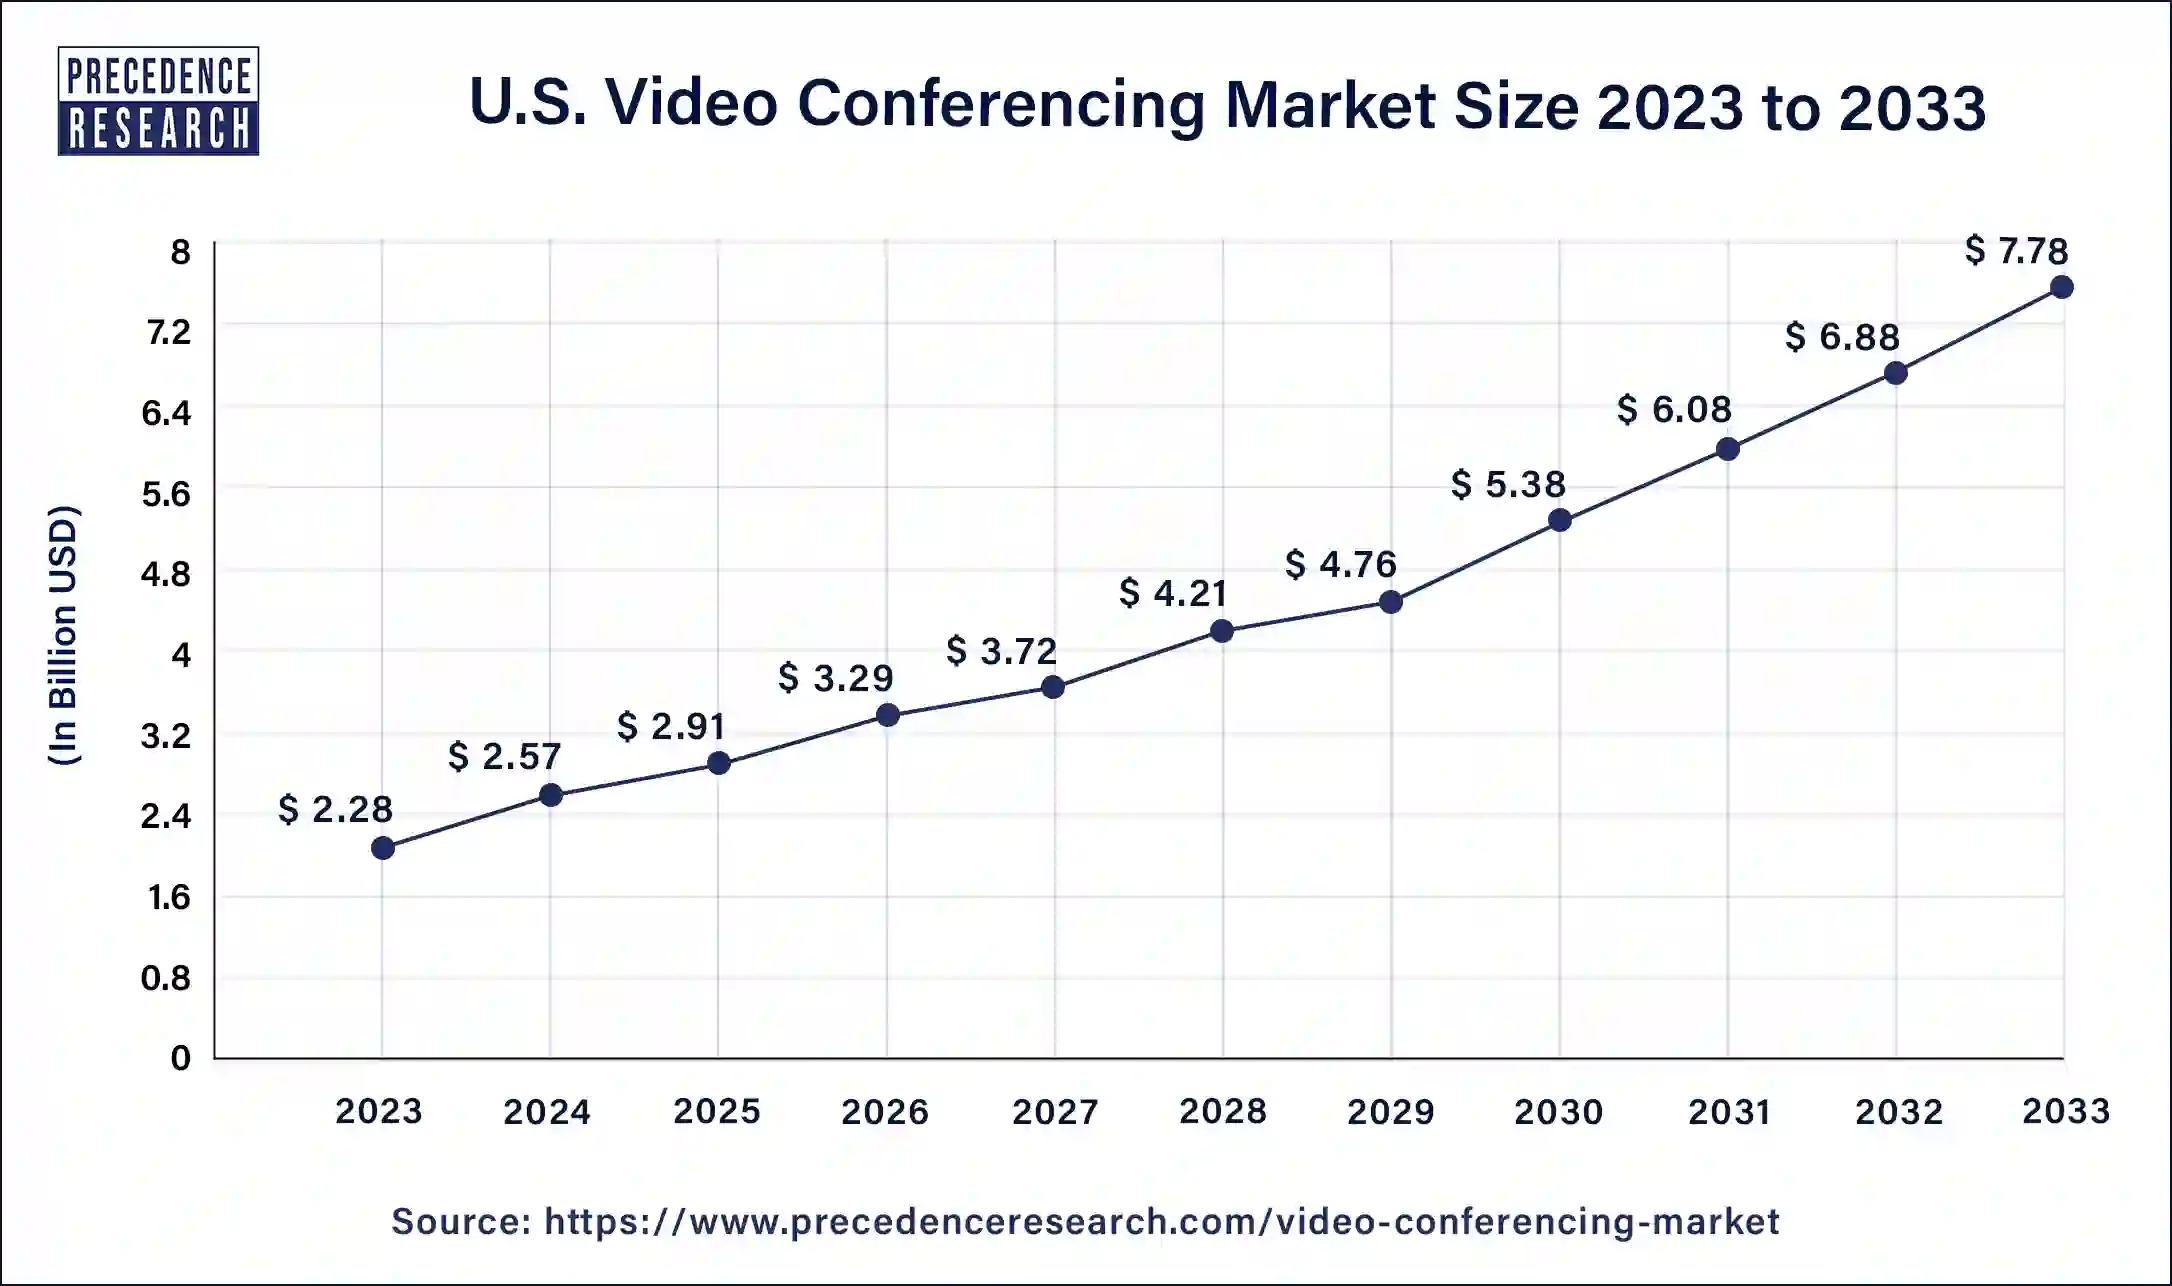 U.S. Video Conferencing Market Size 2024 to 2033